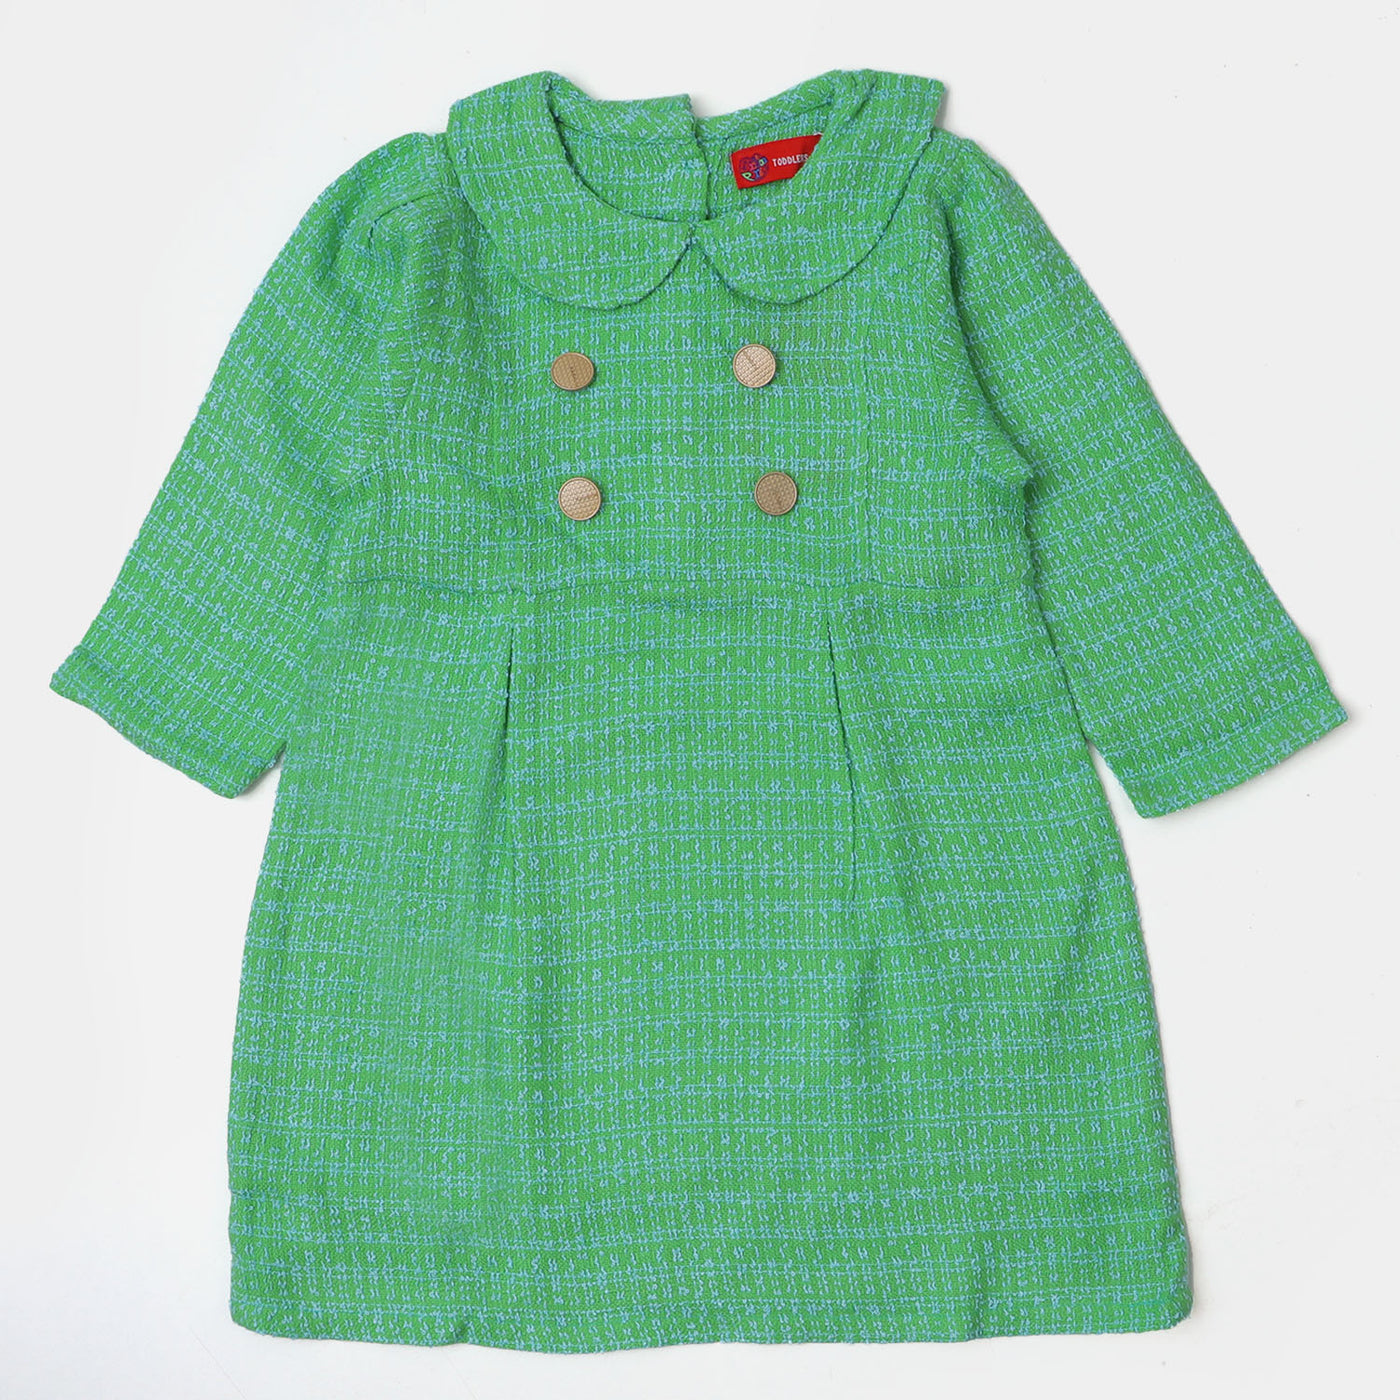 Knitted Girls Trench Coat - Green